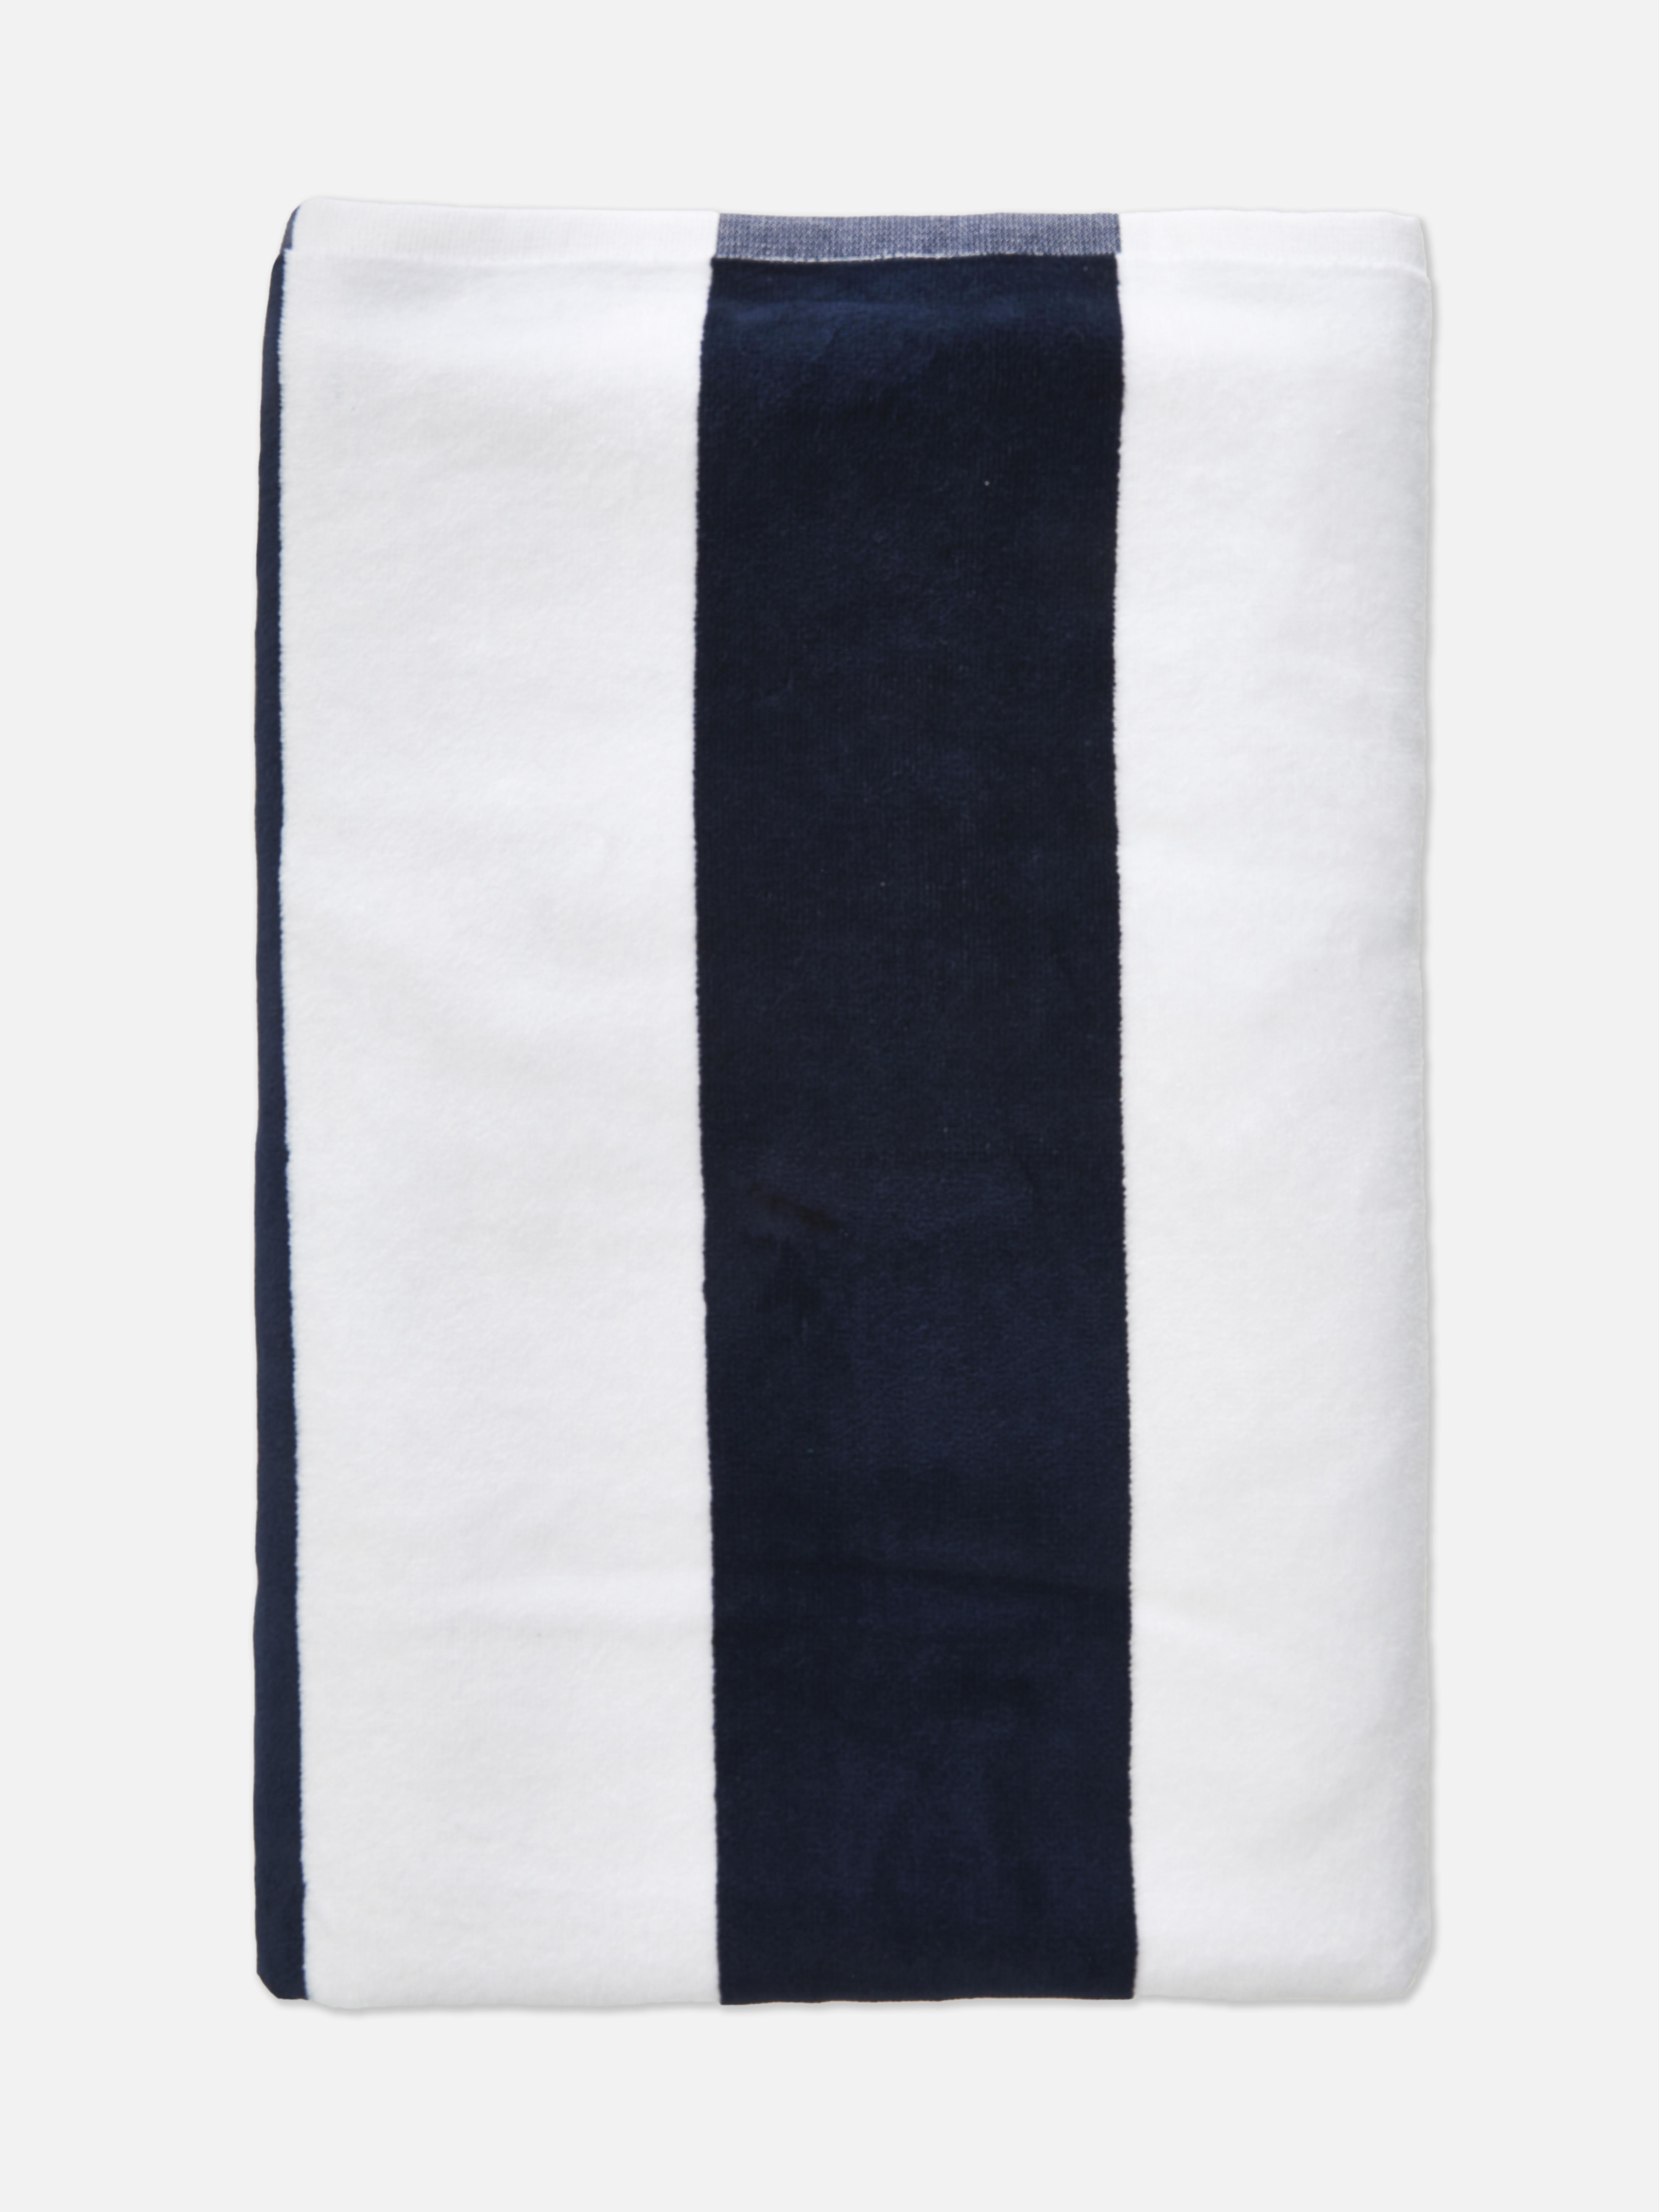 Cotton Patterned Beach Towel